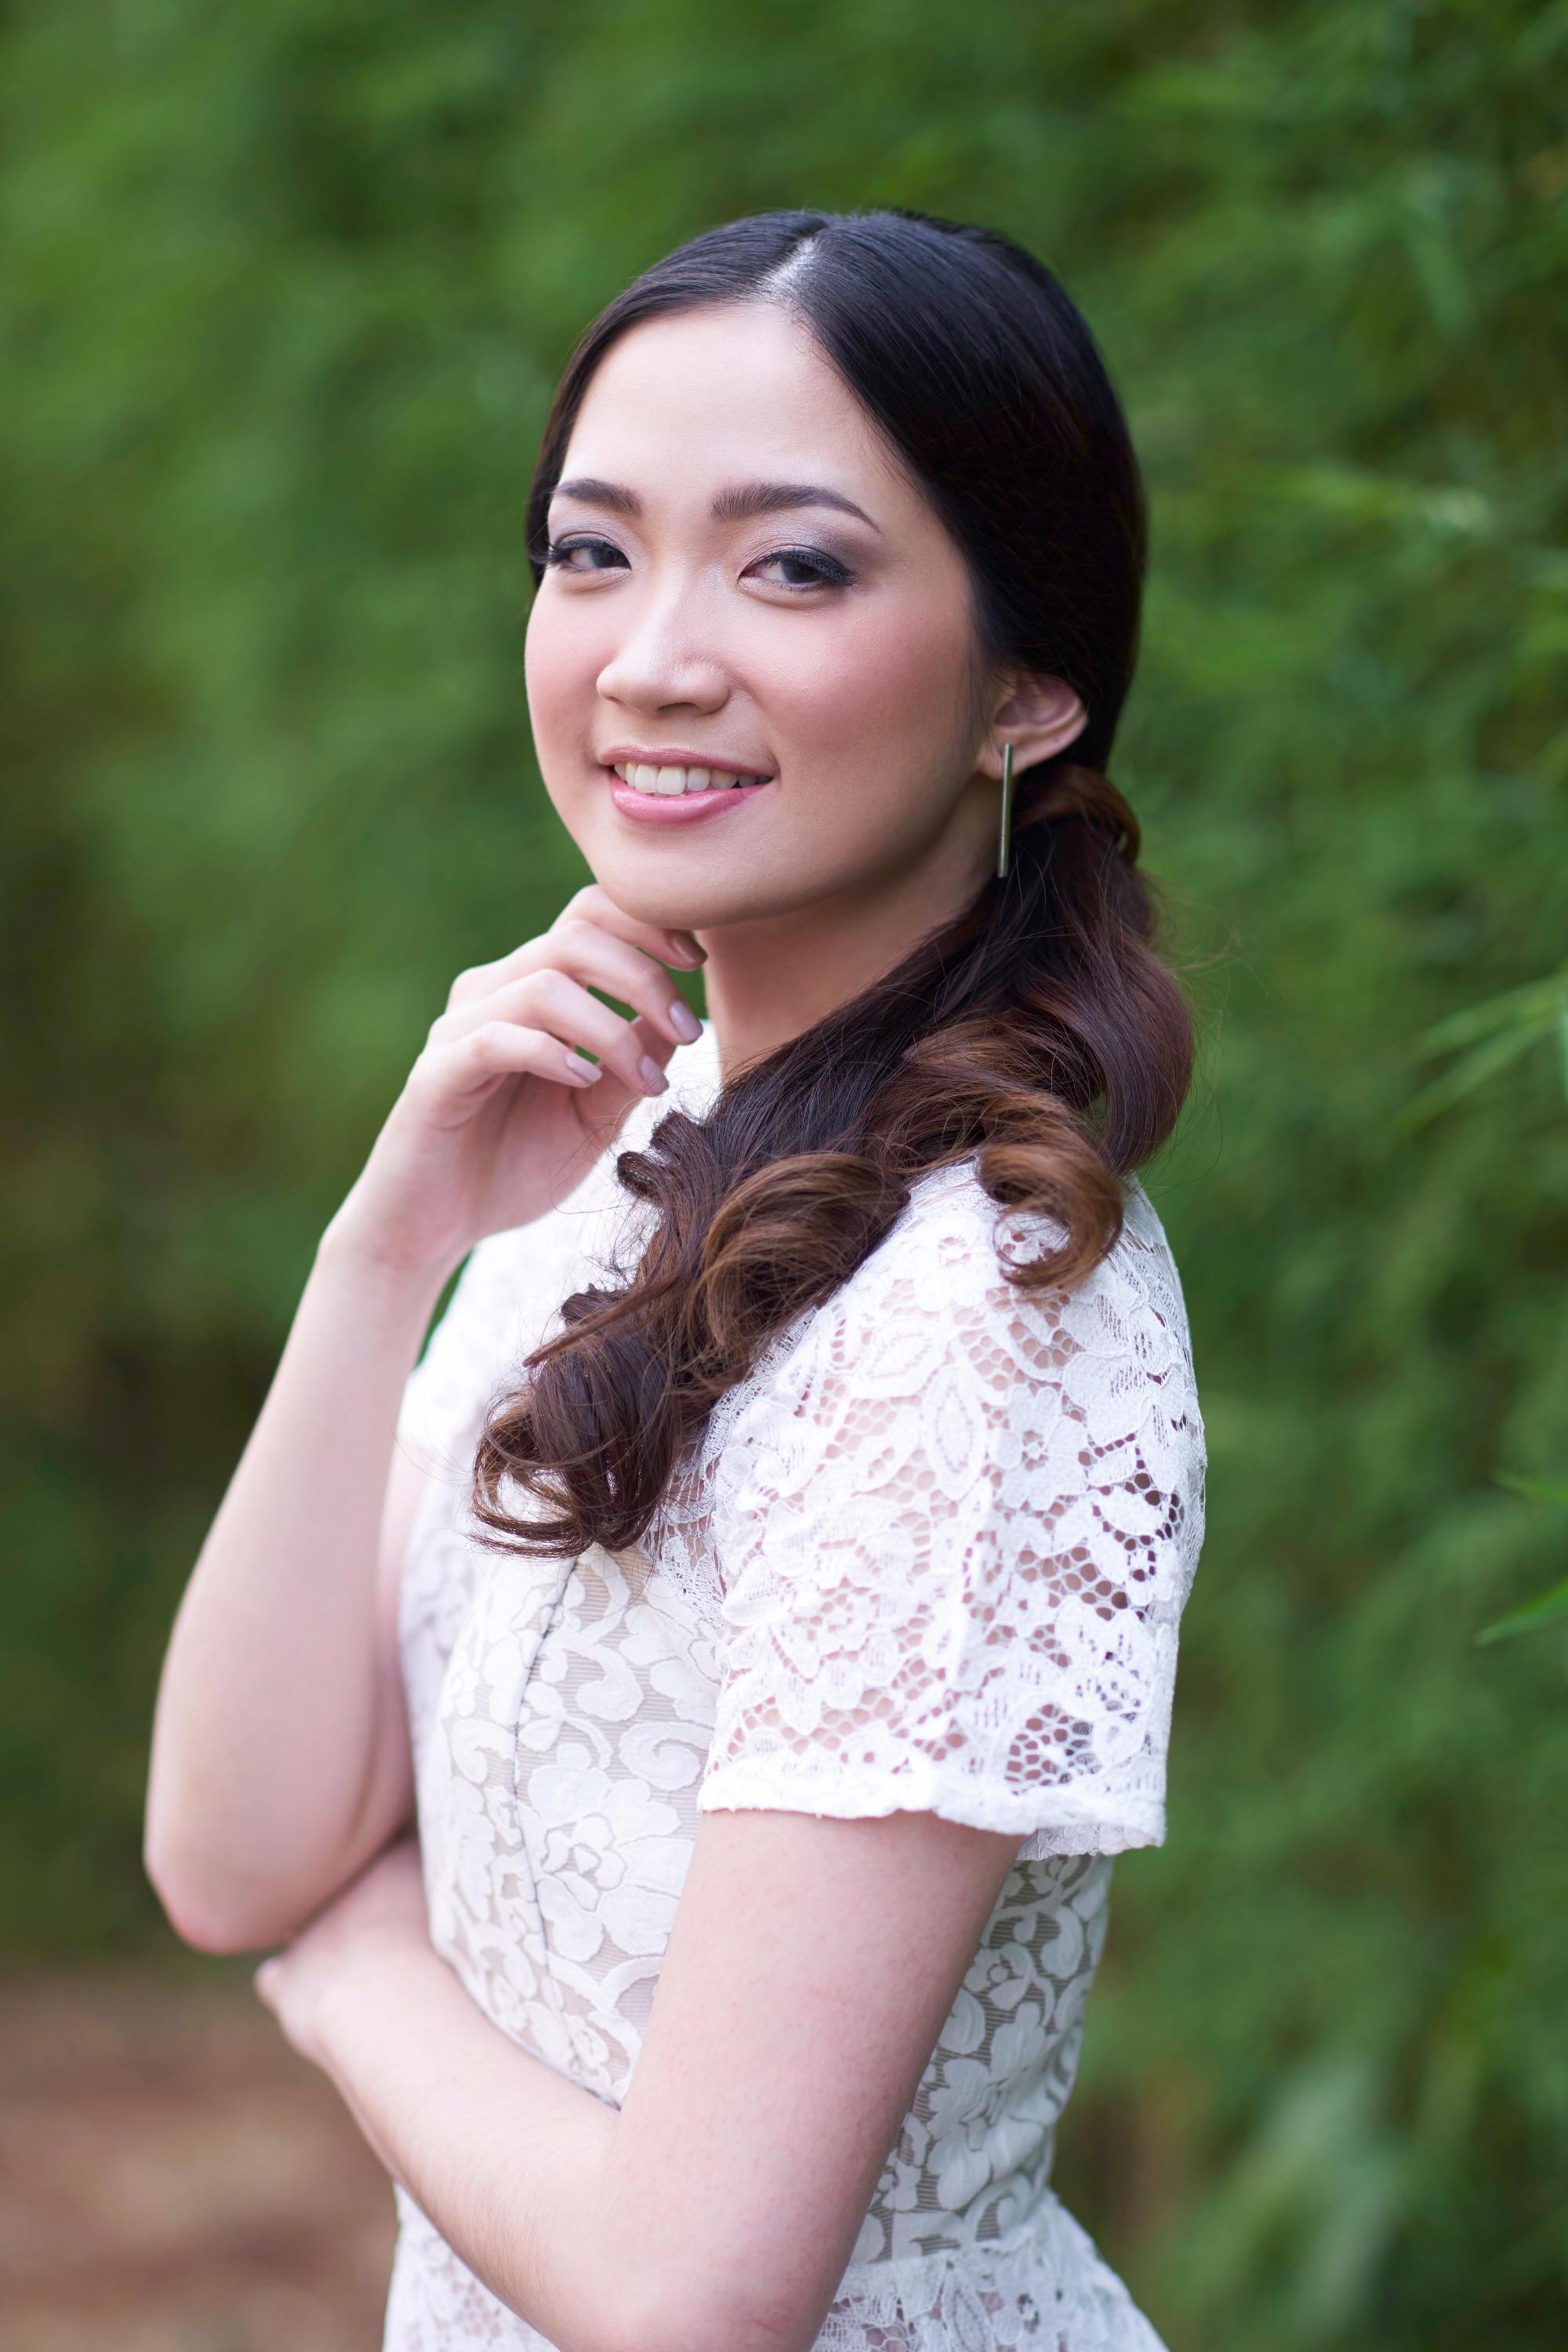 Asian woman with a curly side ponytail wearing a white dress outdoors